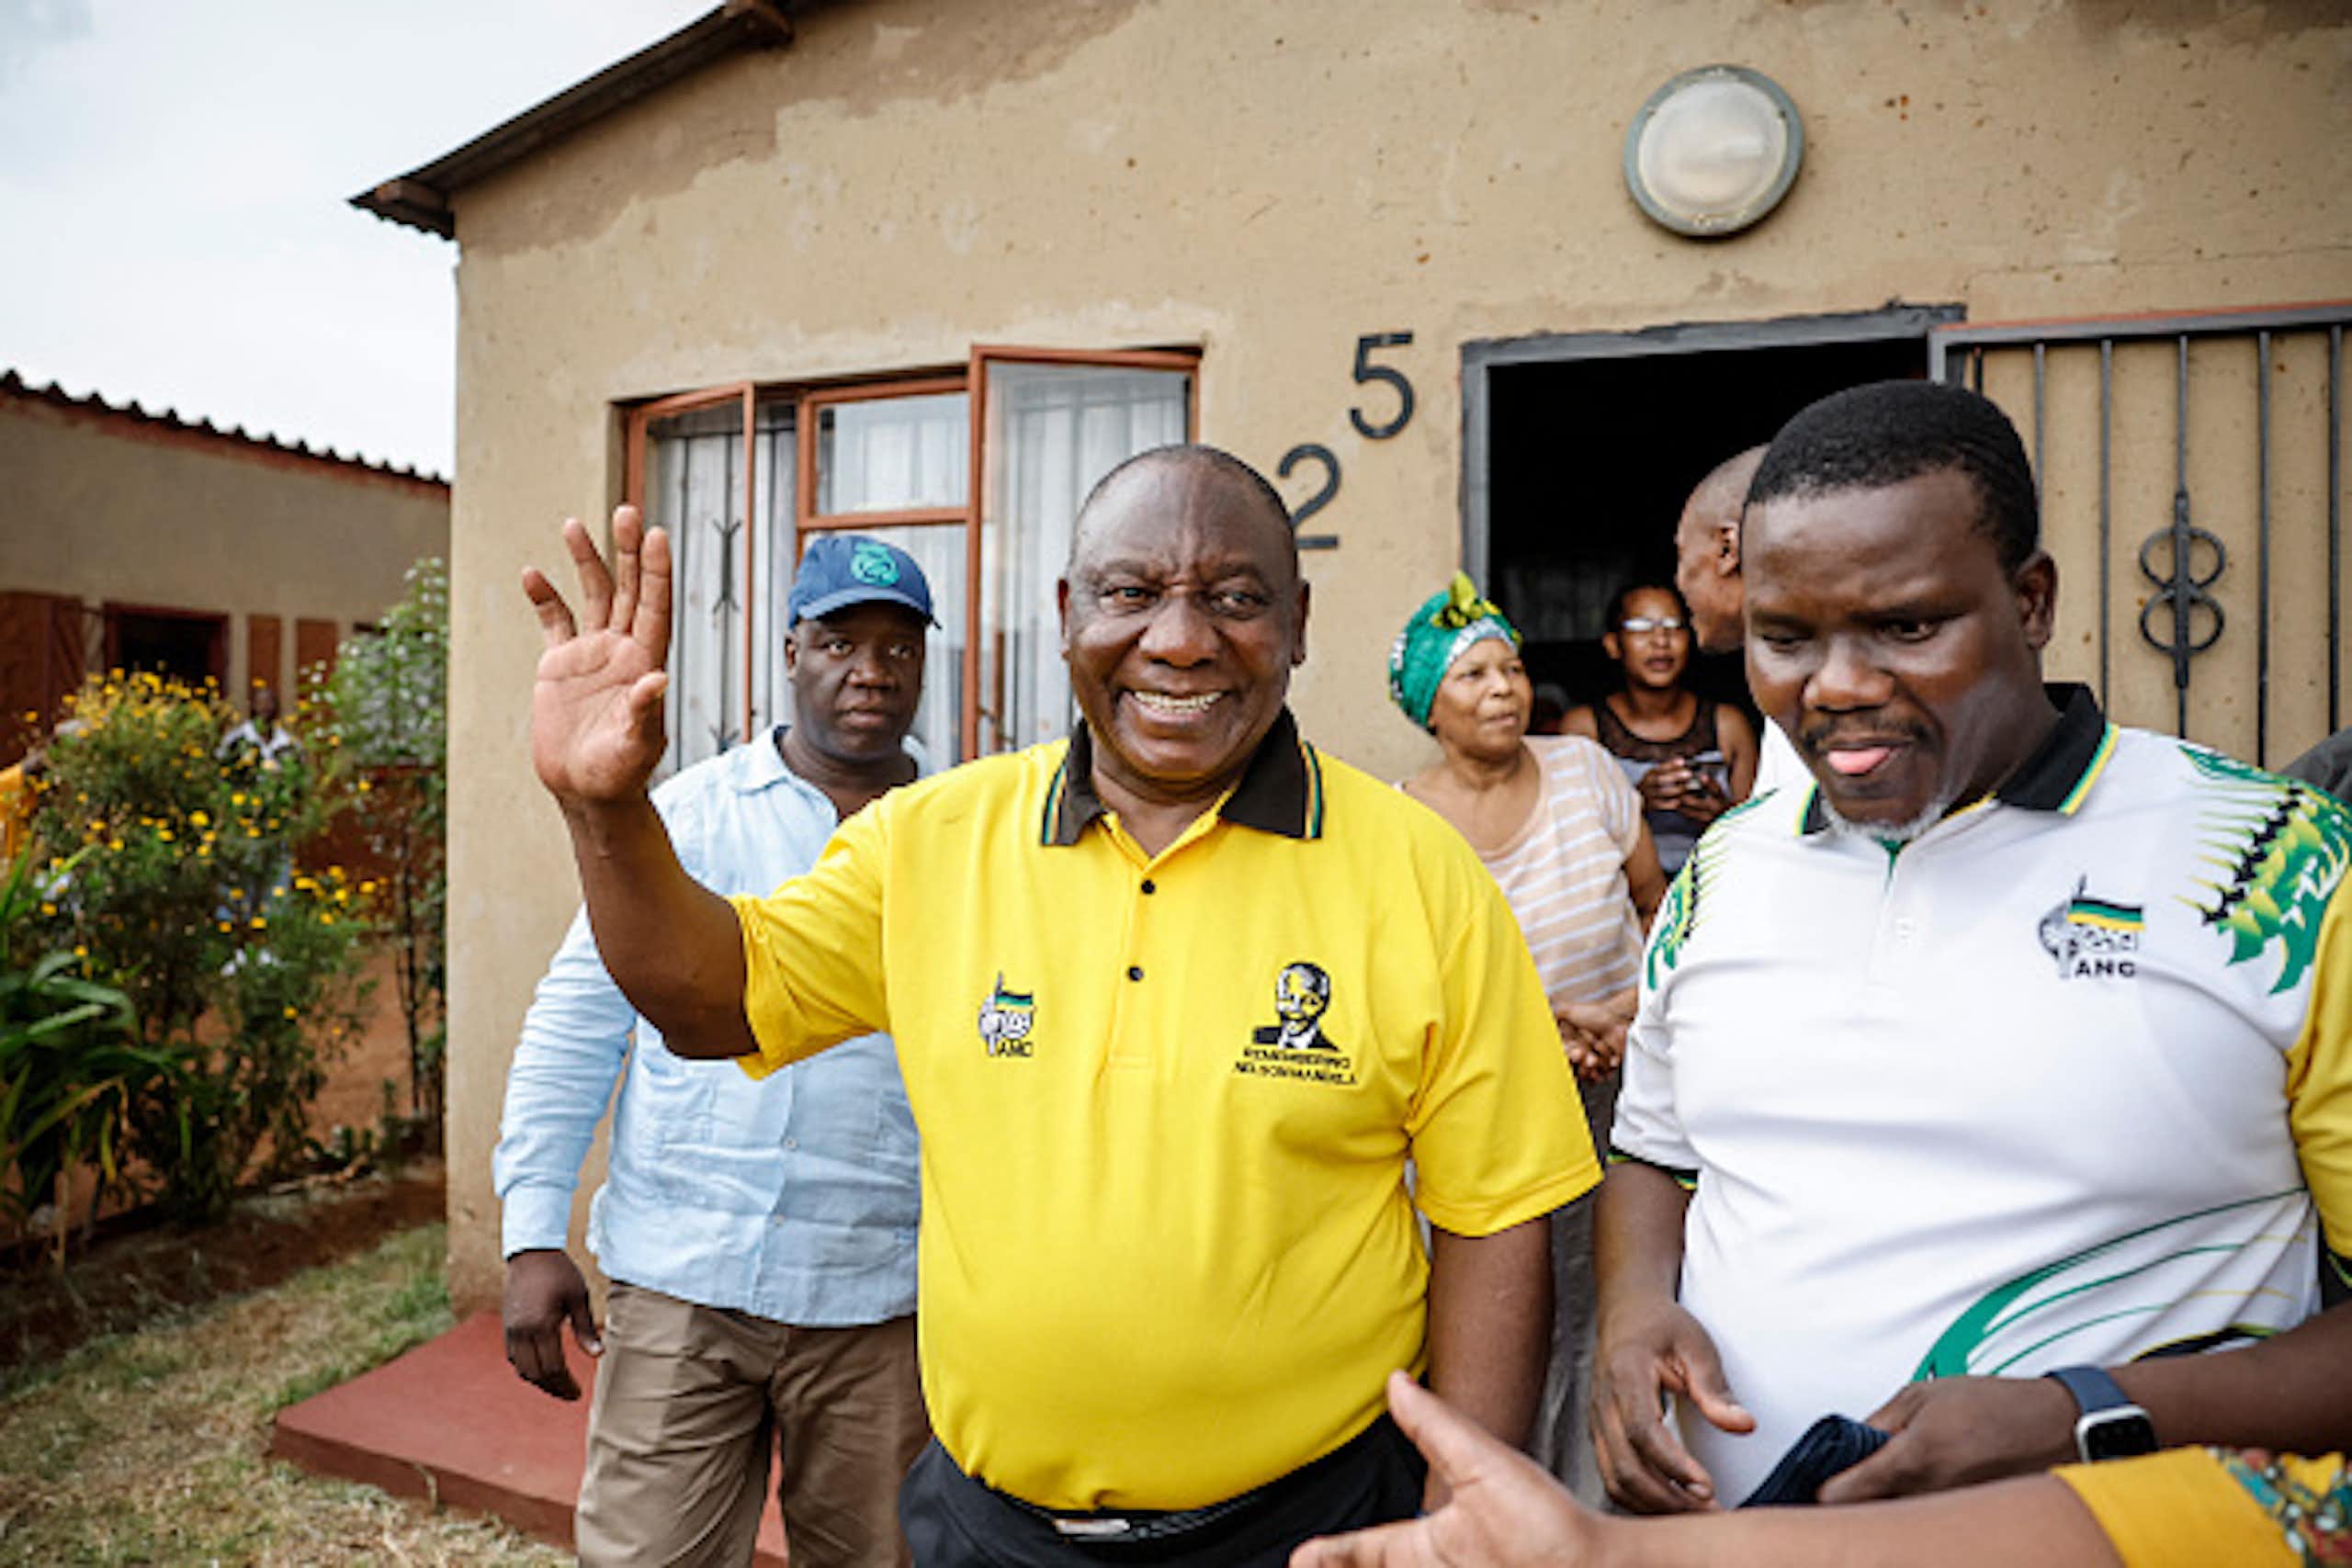 A man in a yellow short smiles and raises a hand in greeting outside a house, with other people standing next to and behind him